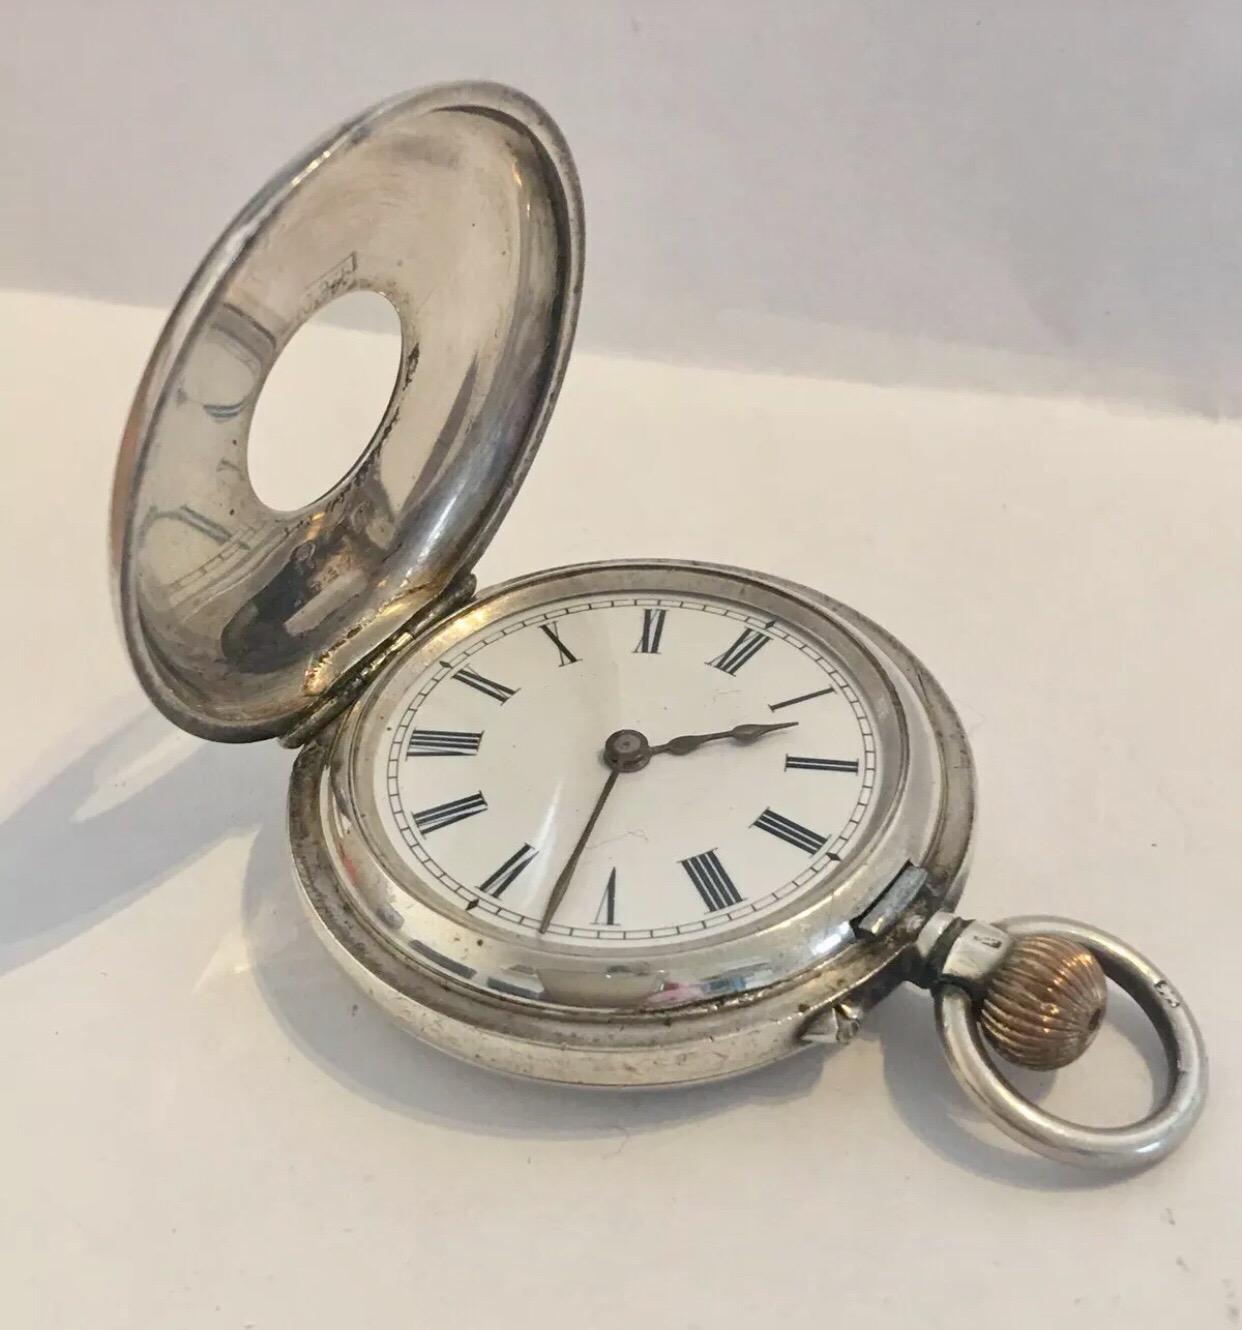 This beautiful silver and pink enamel half hunter small pocket watch is in good working order. But I cannot guarantee the time accuracy. The top cover glass is missing.